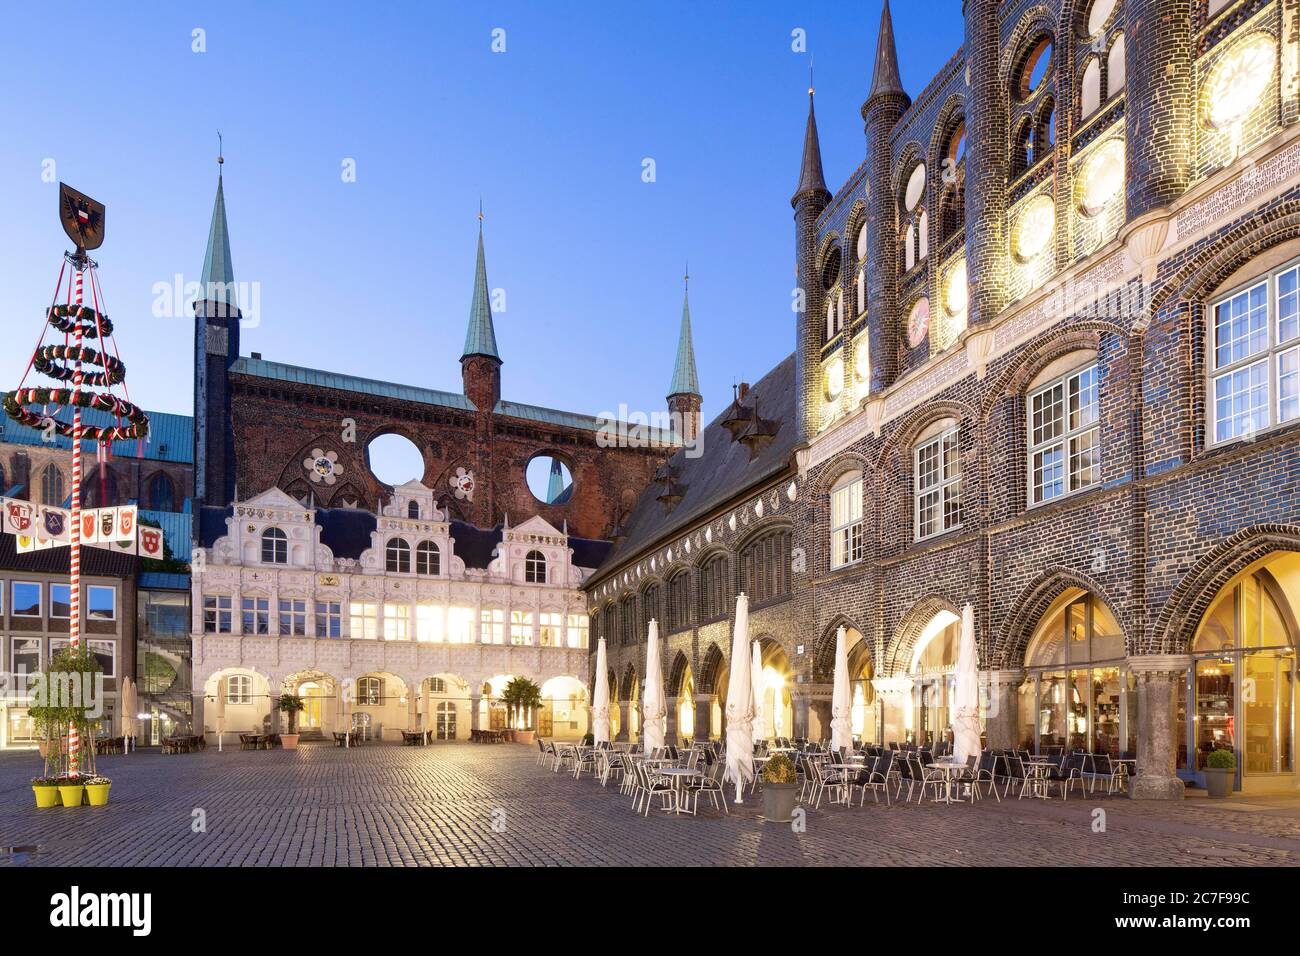 Historical town hall, Renaissance gable, Long House, New Chamber, Market, Luebeck, Schleswig-Holstein, Germany Stock Photo